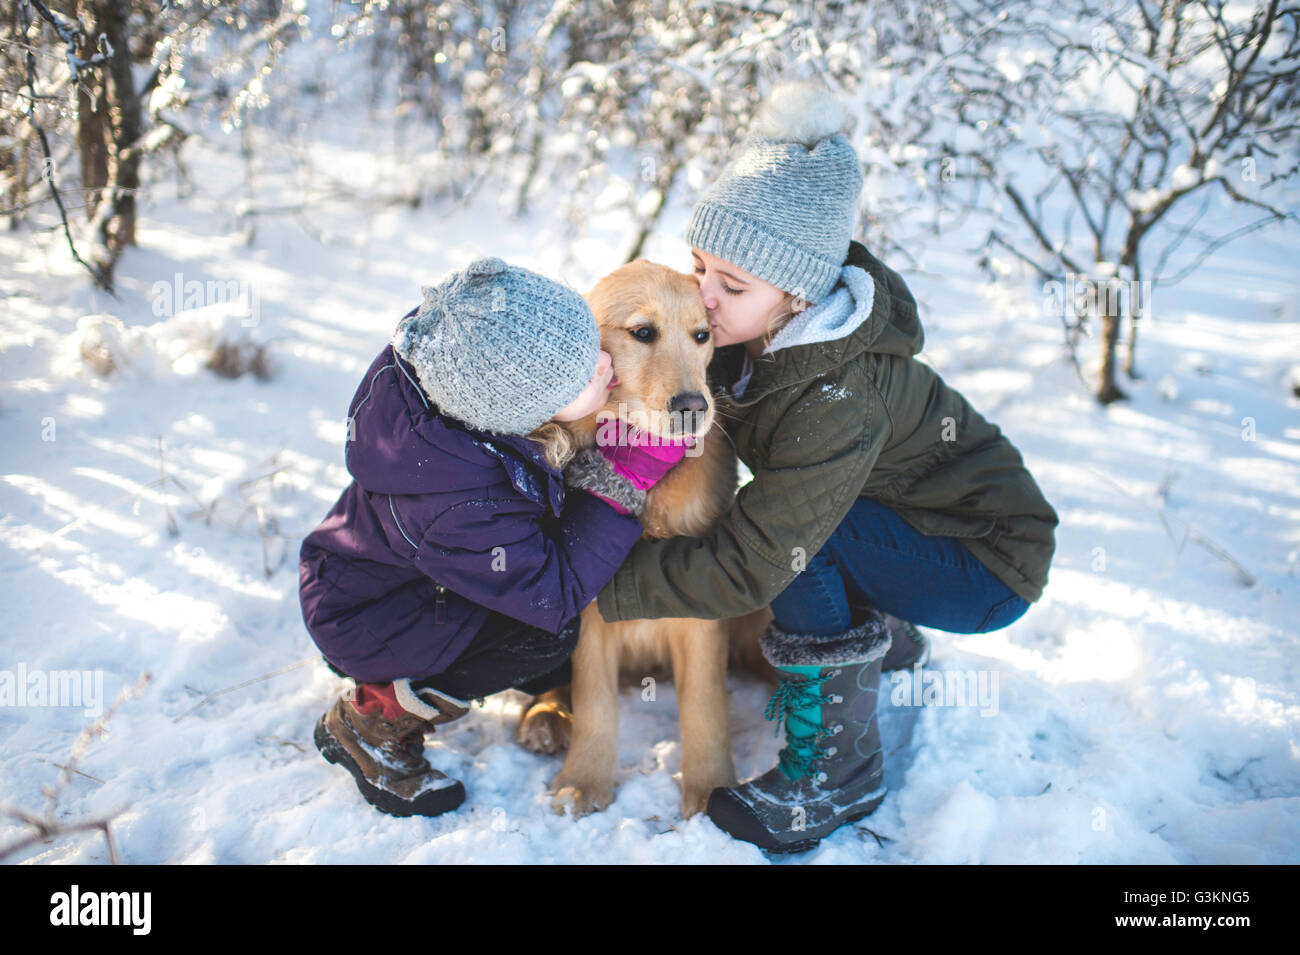 https://c8.alamy.com/comp/G3KNG5/two-young-girls-hugging-dog-in-snowy-landscape-G3KNG5.jpg